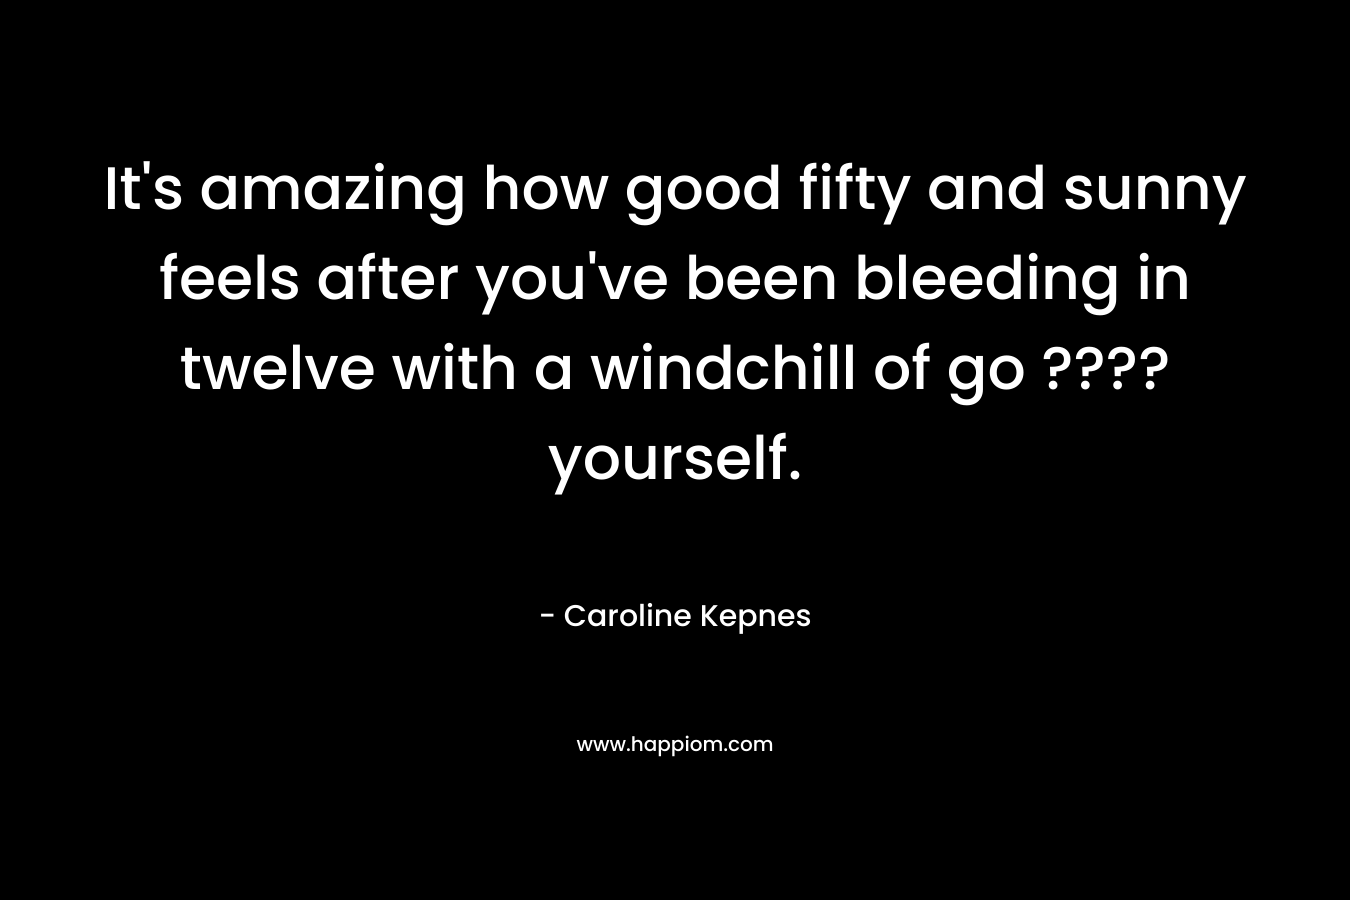 It’s amazing how good fifty and sunny feels after you’ve been bleeding in twelve with a windchill of go ???? yourself. – Caroline Kepnes